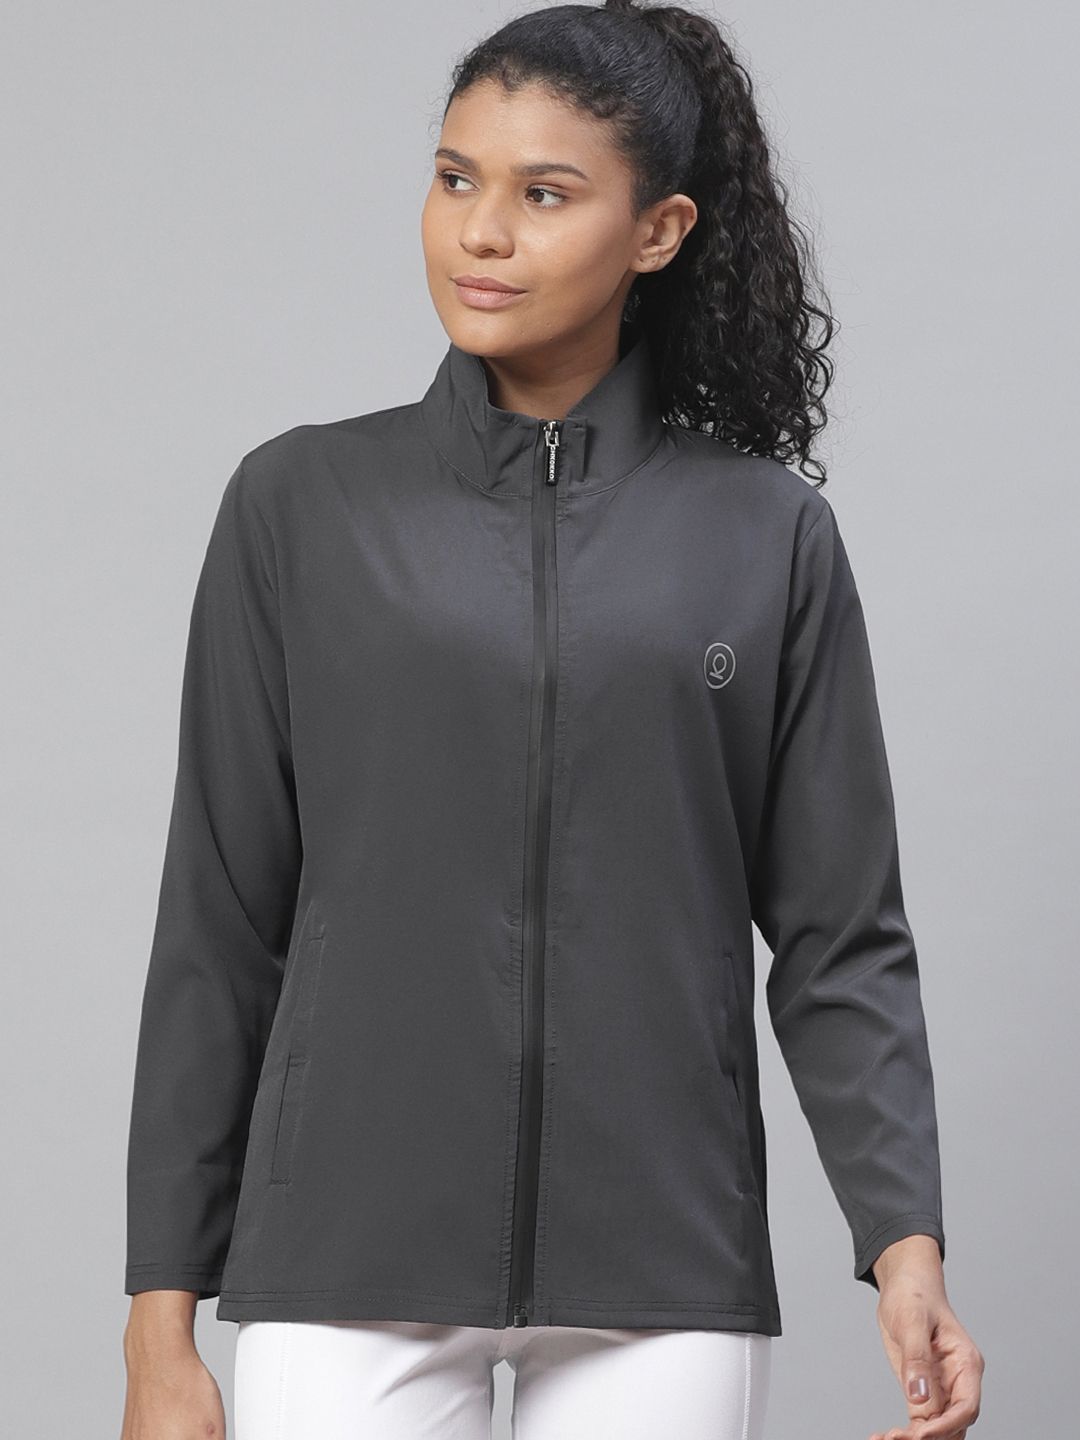 Chkokko Women Charcoal Grey Solid Running Jacket Price in India